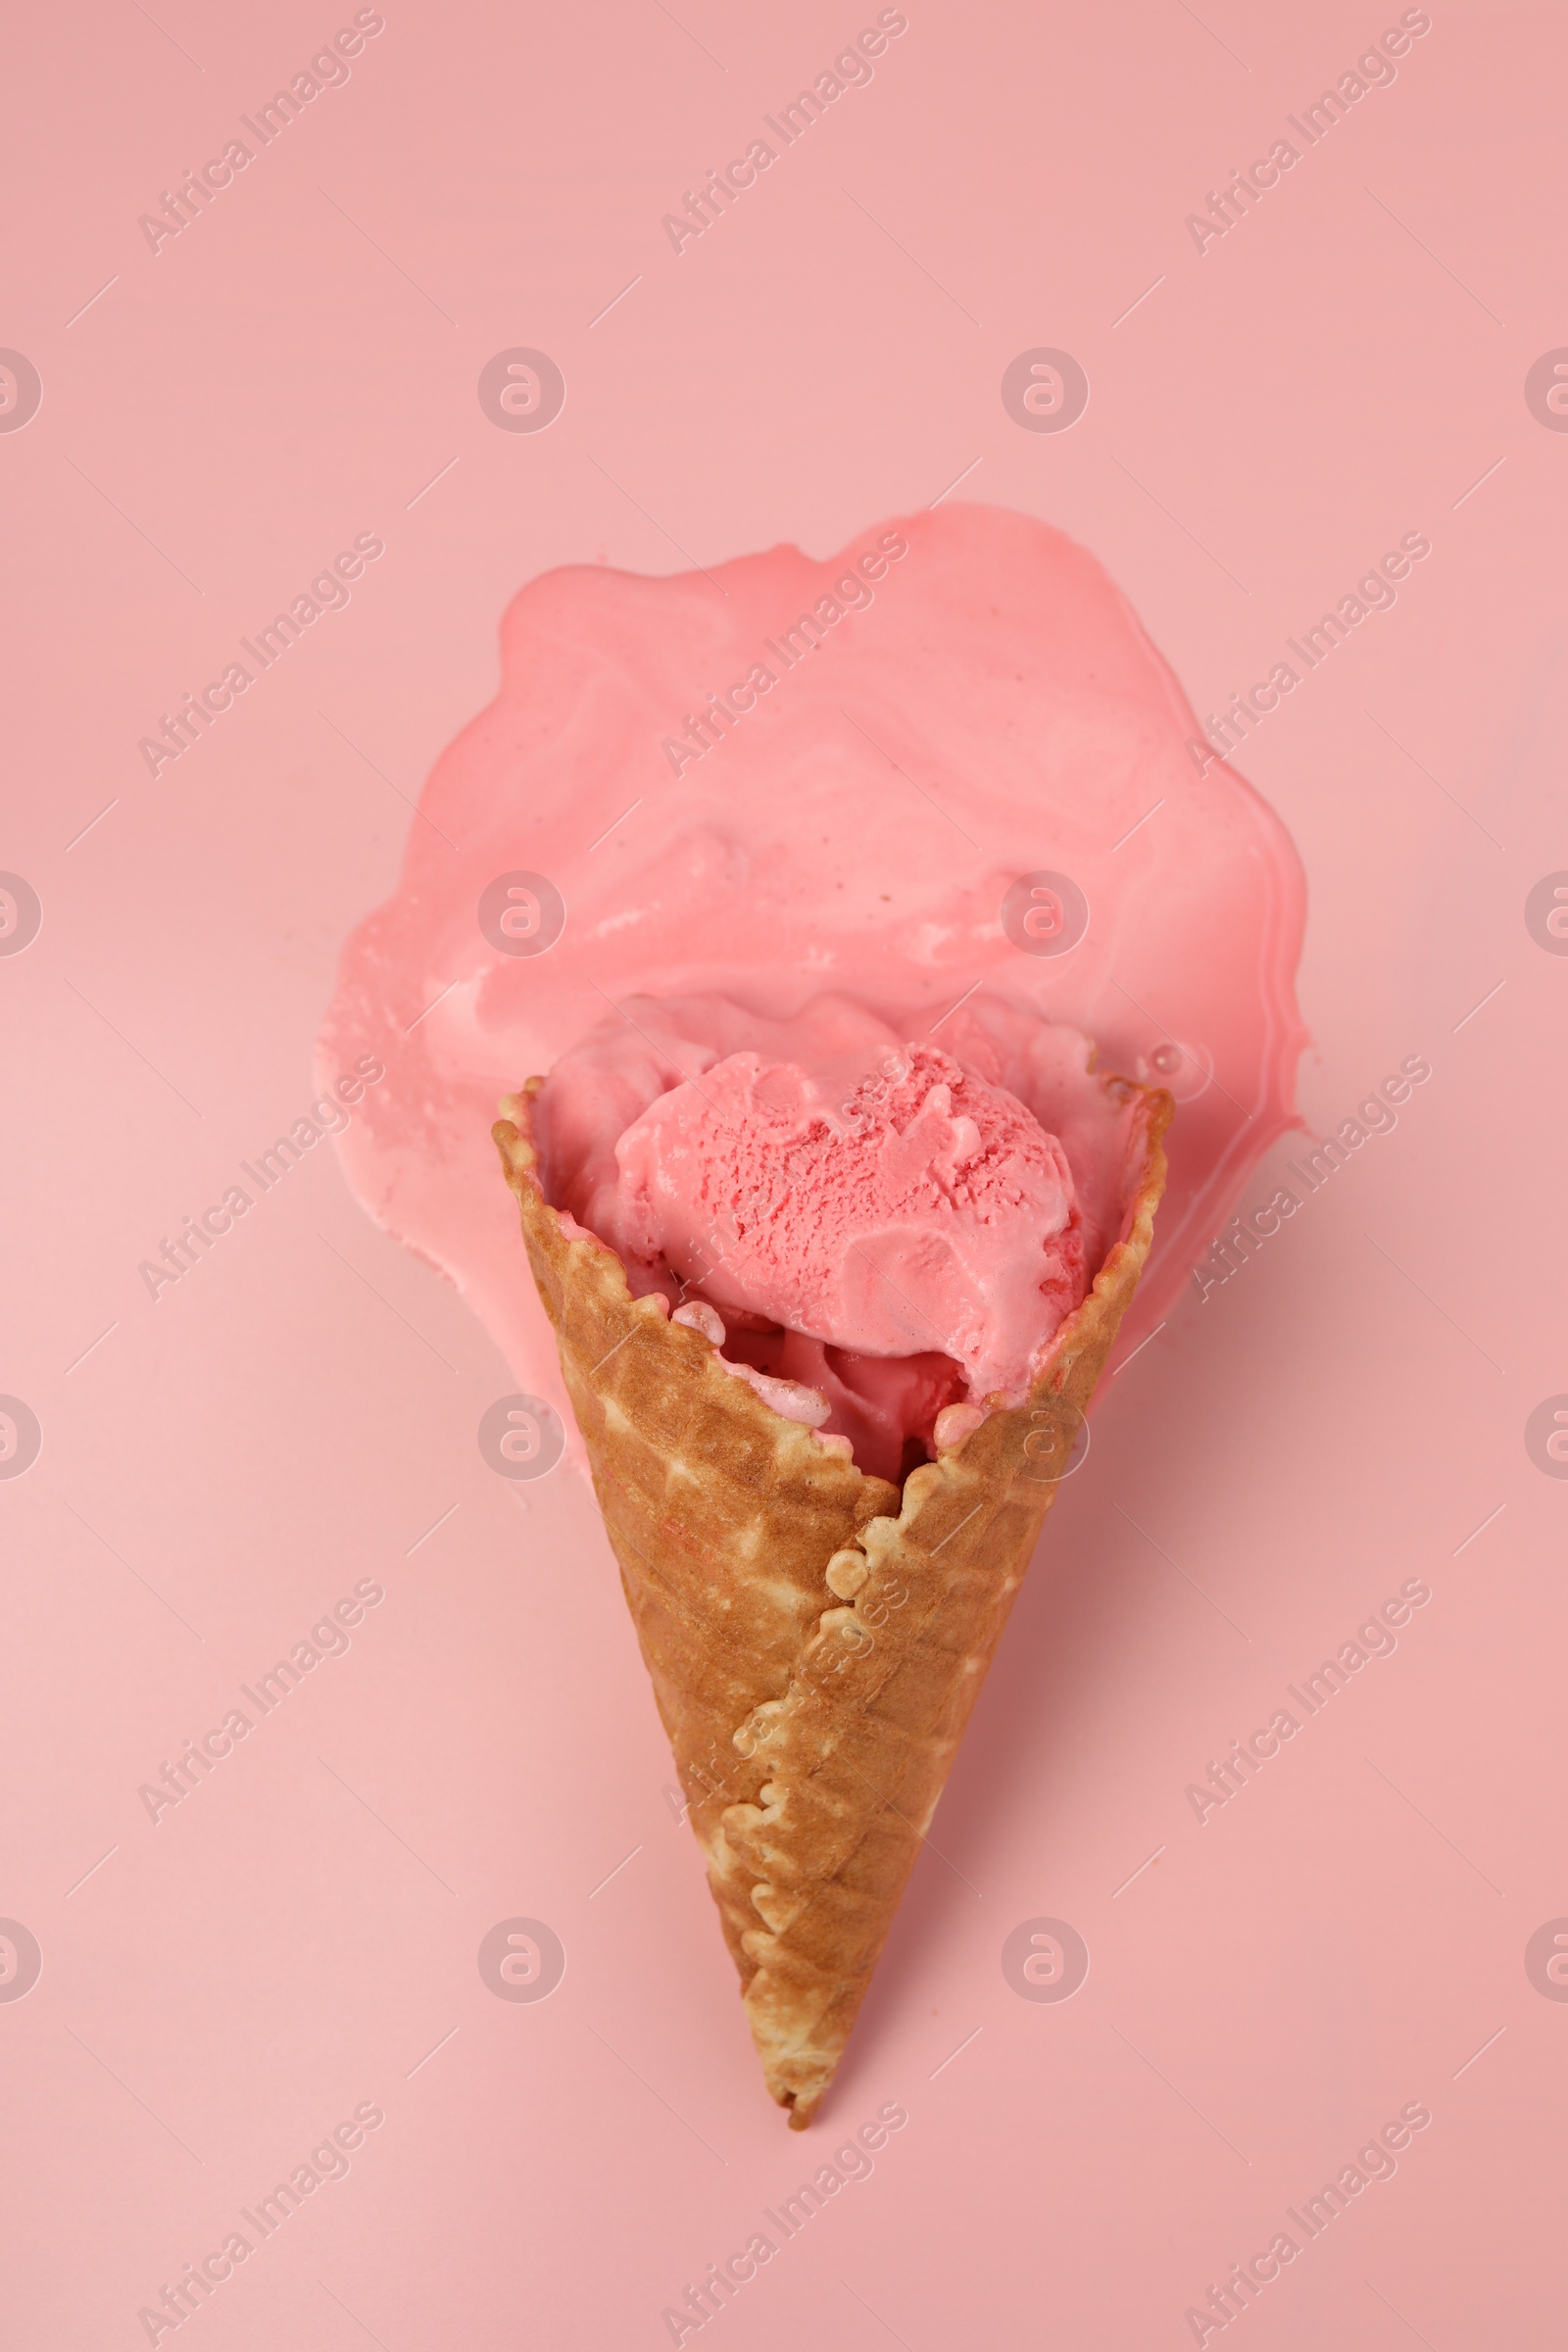 Photo of Melted ice cream in wafer cone on pink background, top view